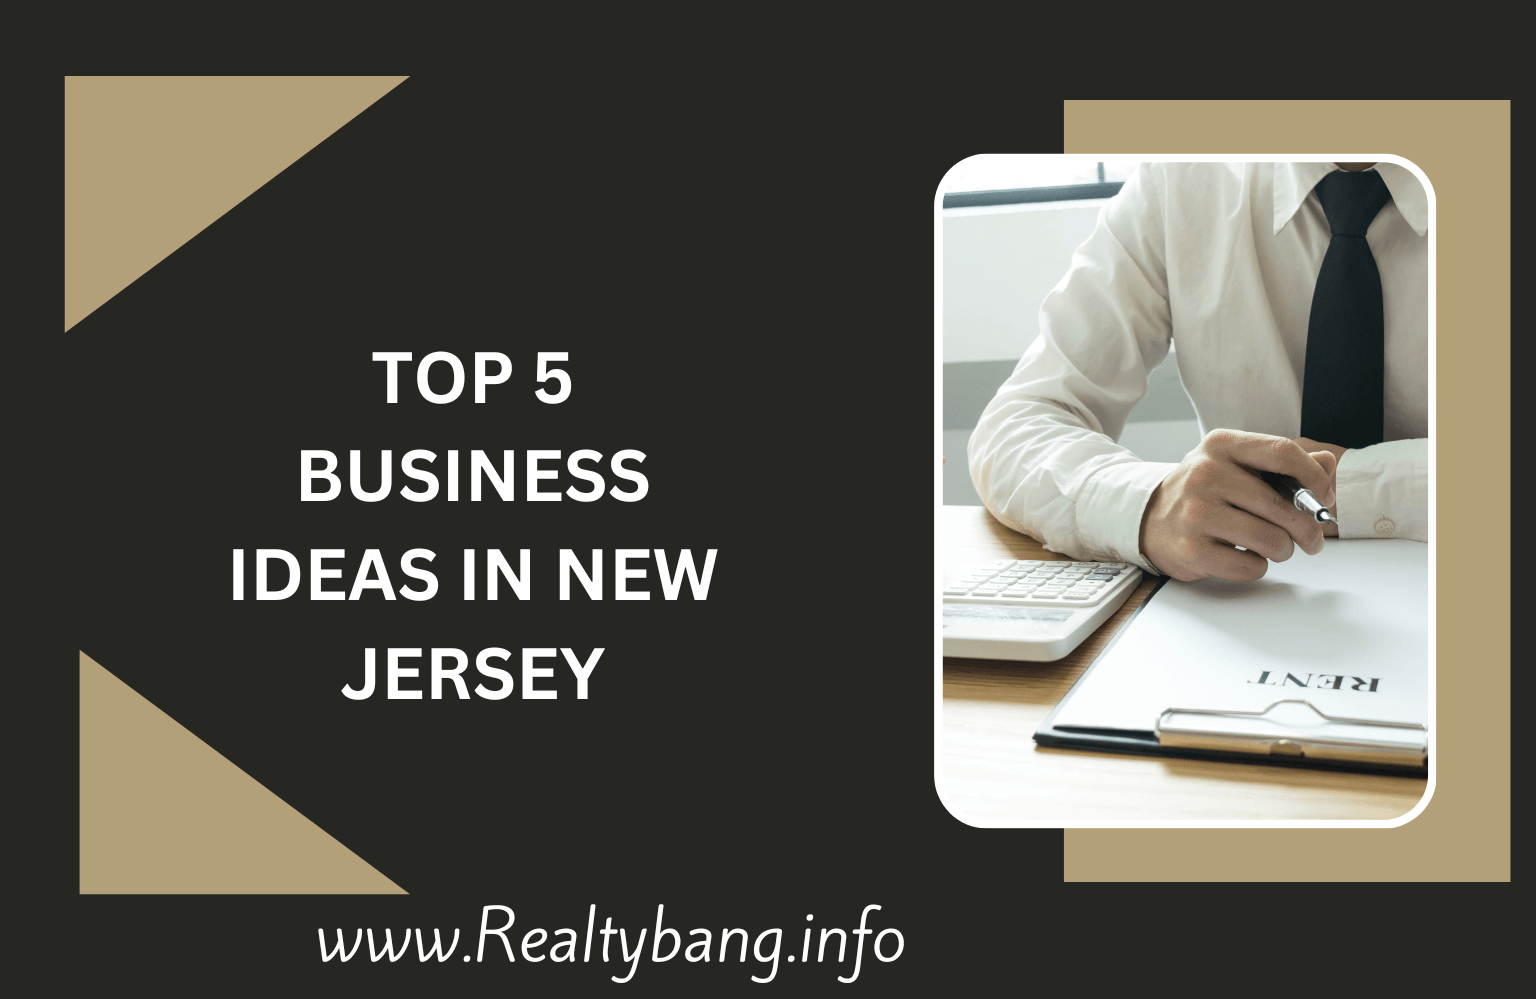 TOP 5 BUSINESS IDEAS IN NEW JERSEY